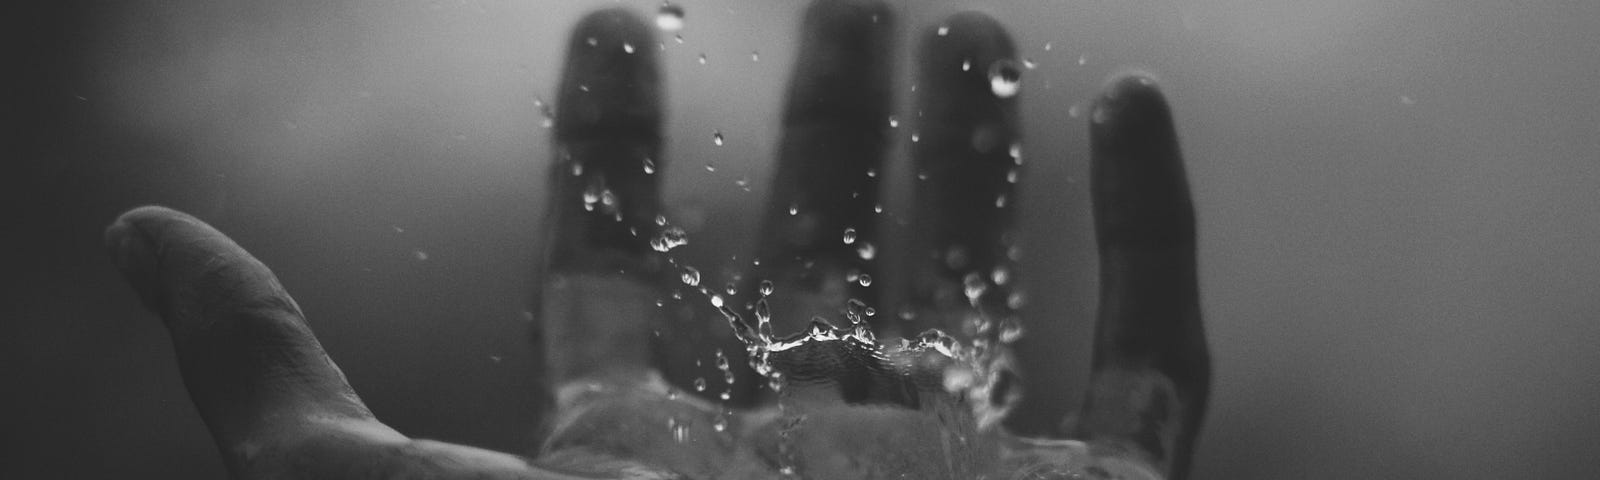 Black and white photo of a left hand, palm up, catch a large raindrop splashing on the palm.